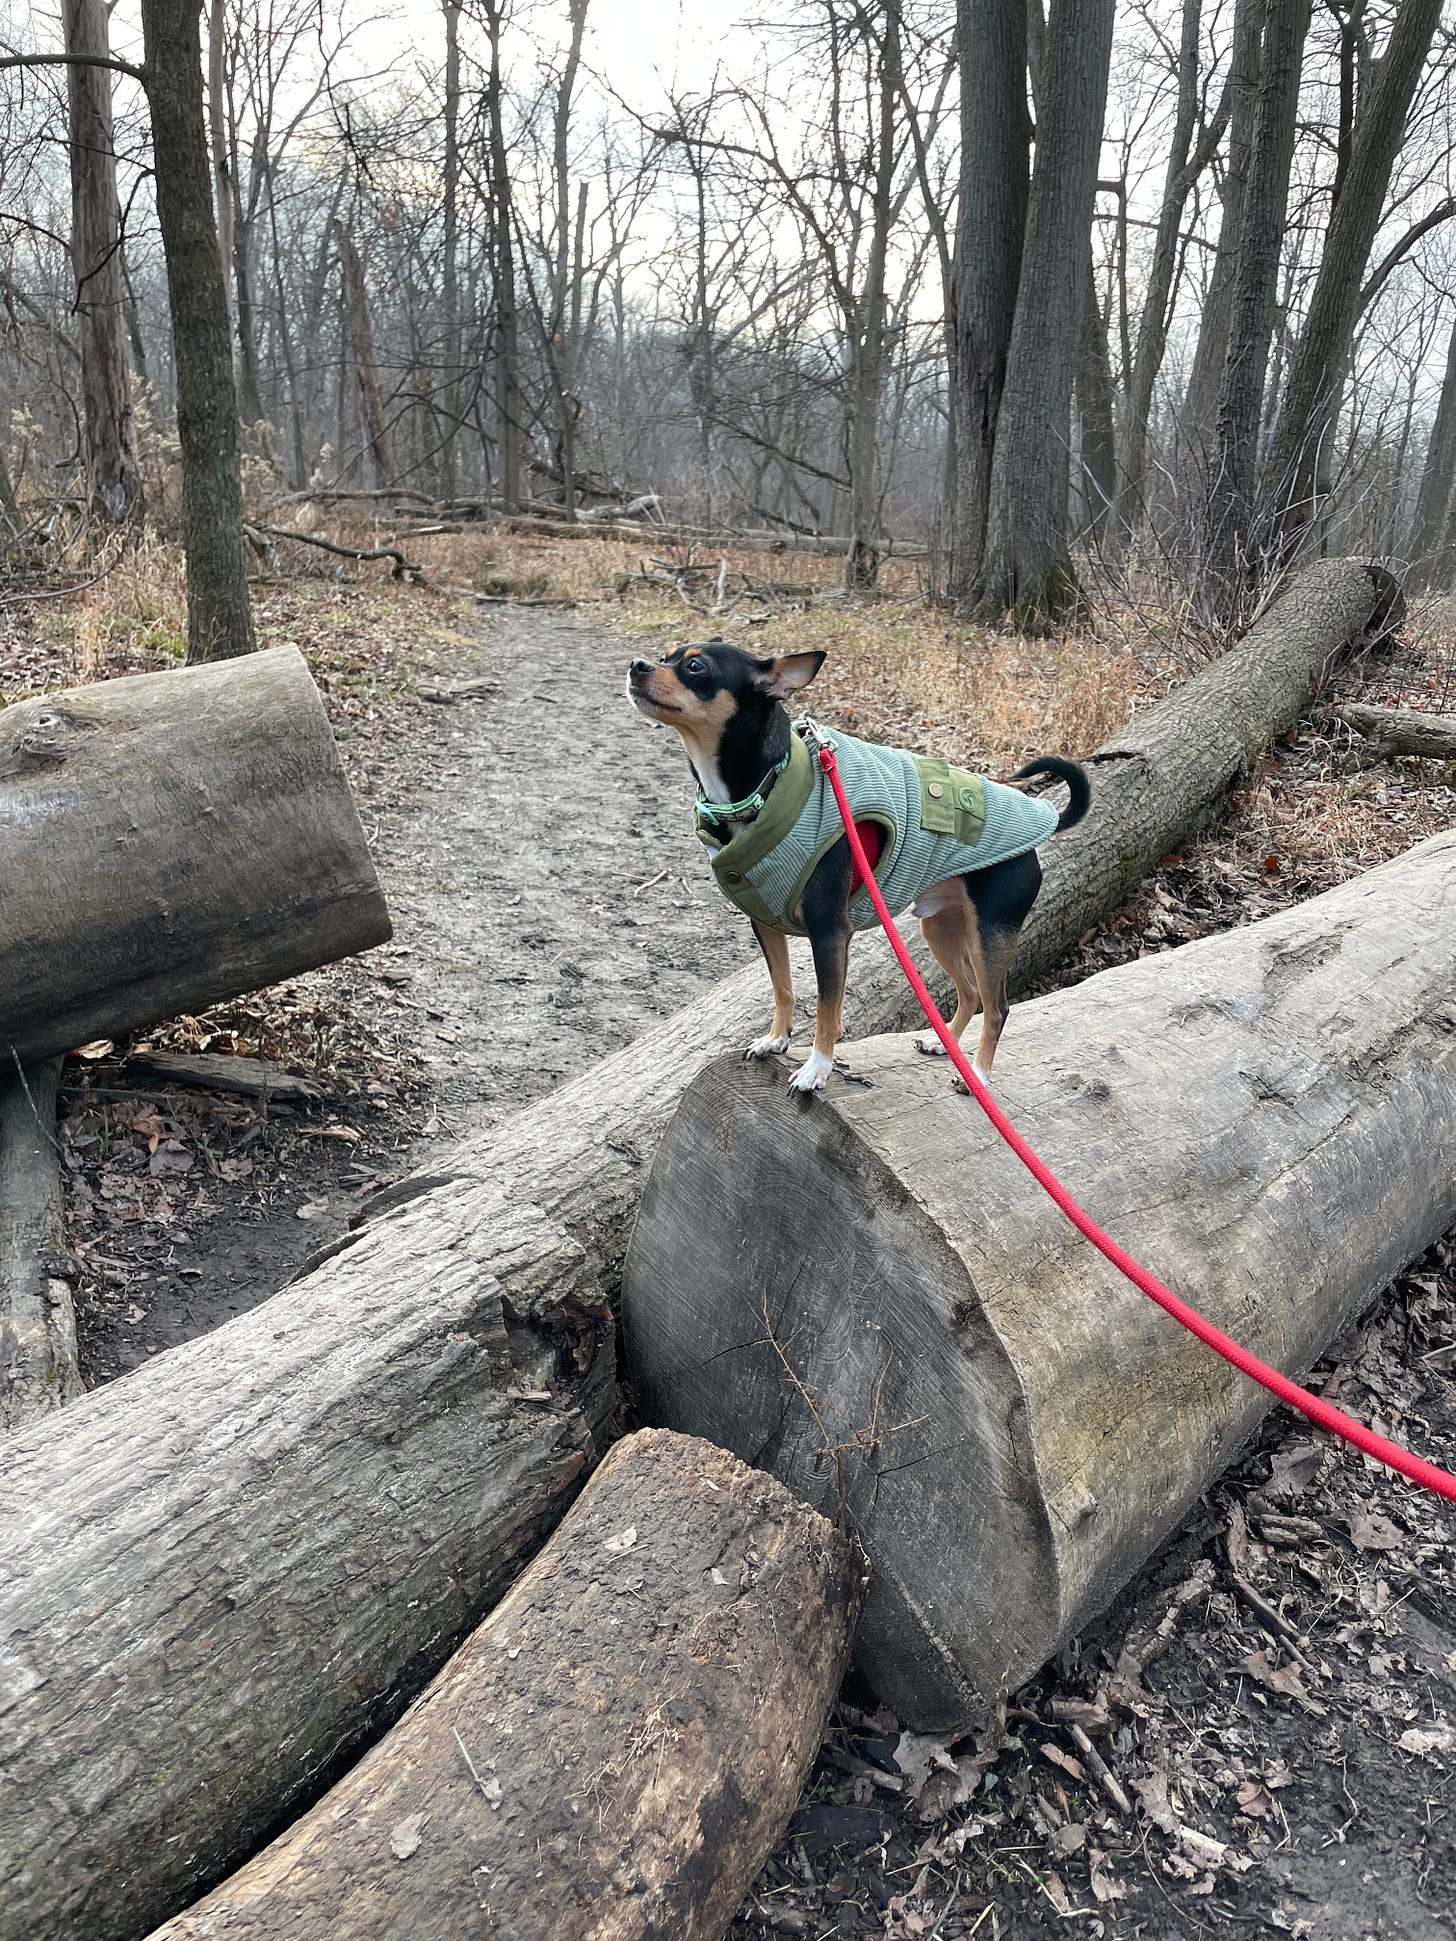 A chihuahua wearing a green jacket, standing on a log in a forest preserve.